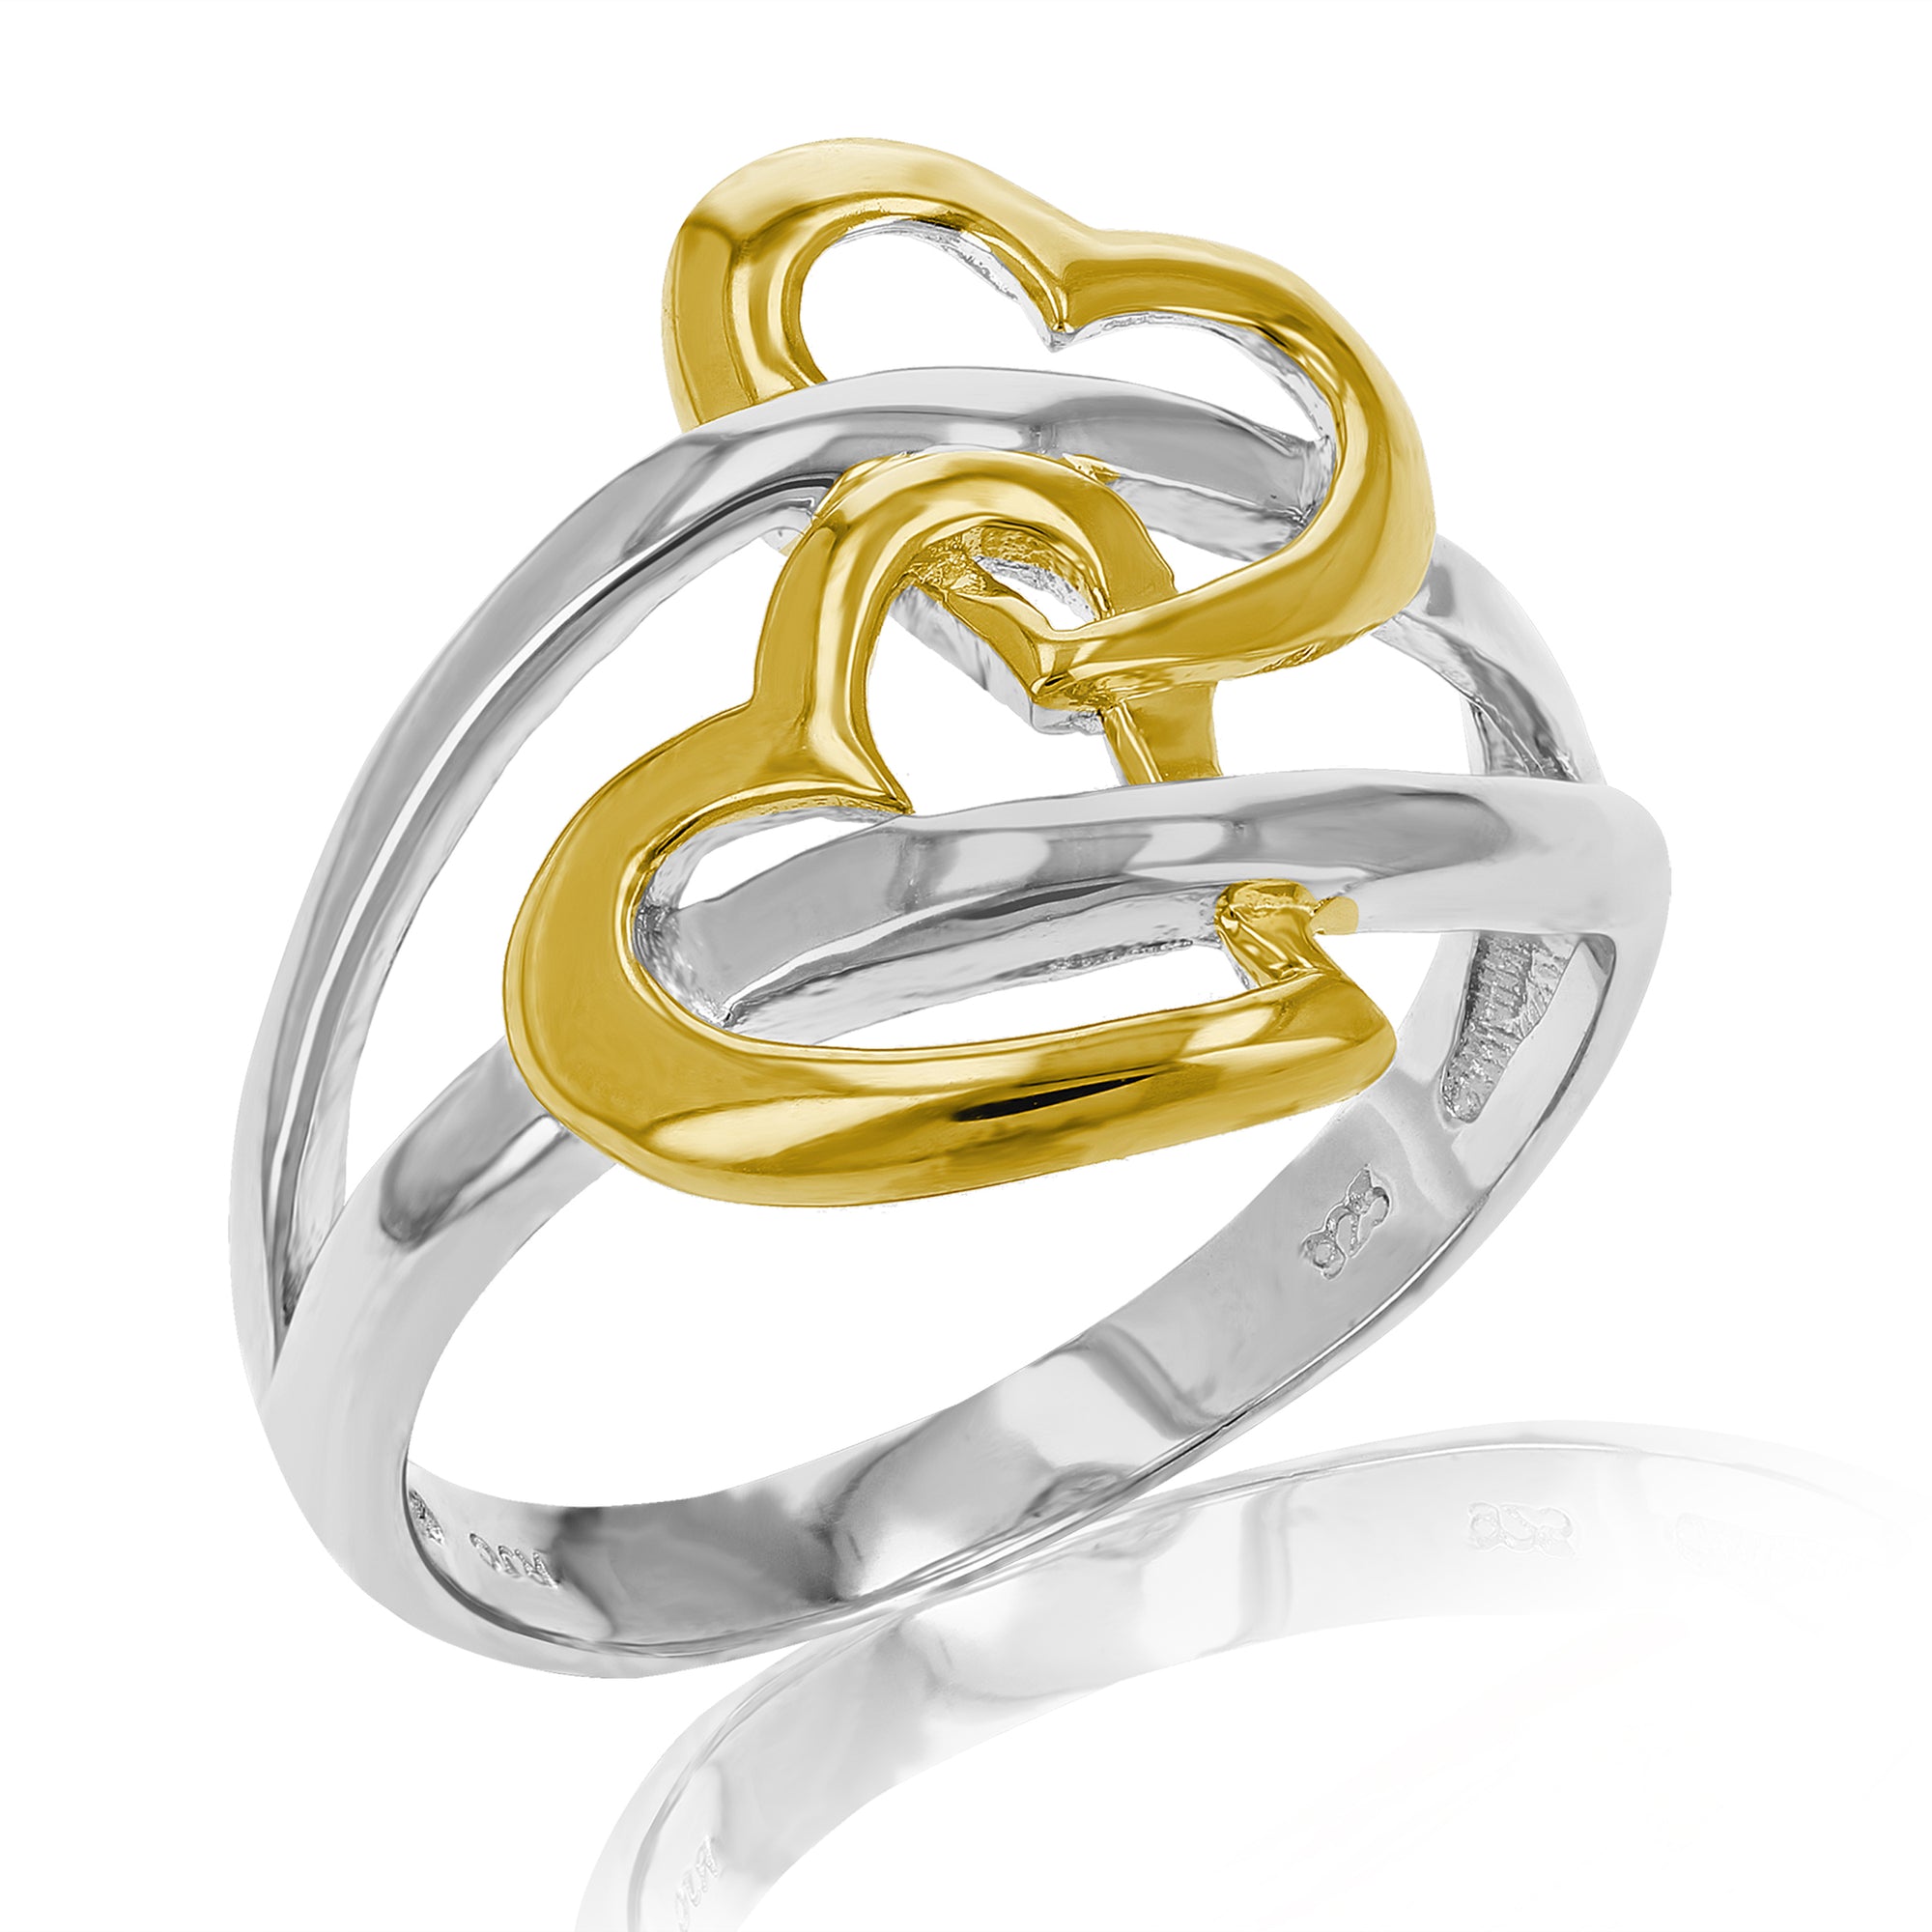 2 Hearts Fashion Ring in Yellow Gold Plated over .925 Sterling Silver